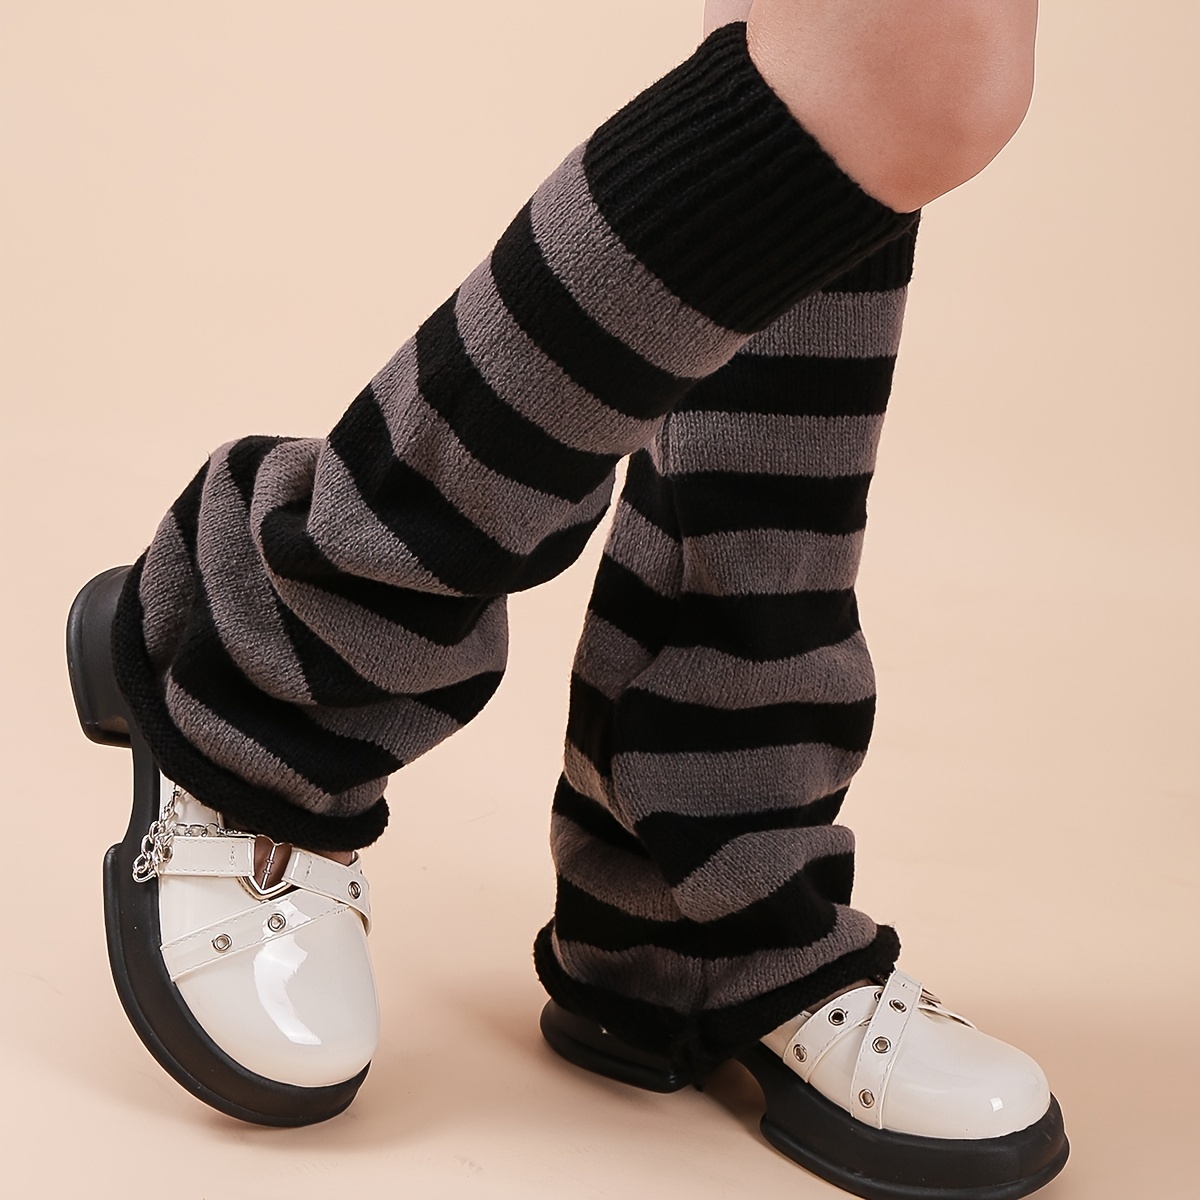 FULA-bao Womens Fashion Striped Leg Warmers Adult Junior 80s Ribbed Knitted  Long Socks for Party Sports Casual Socks